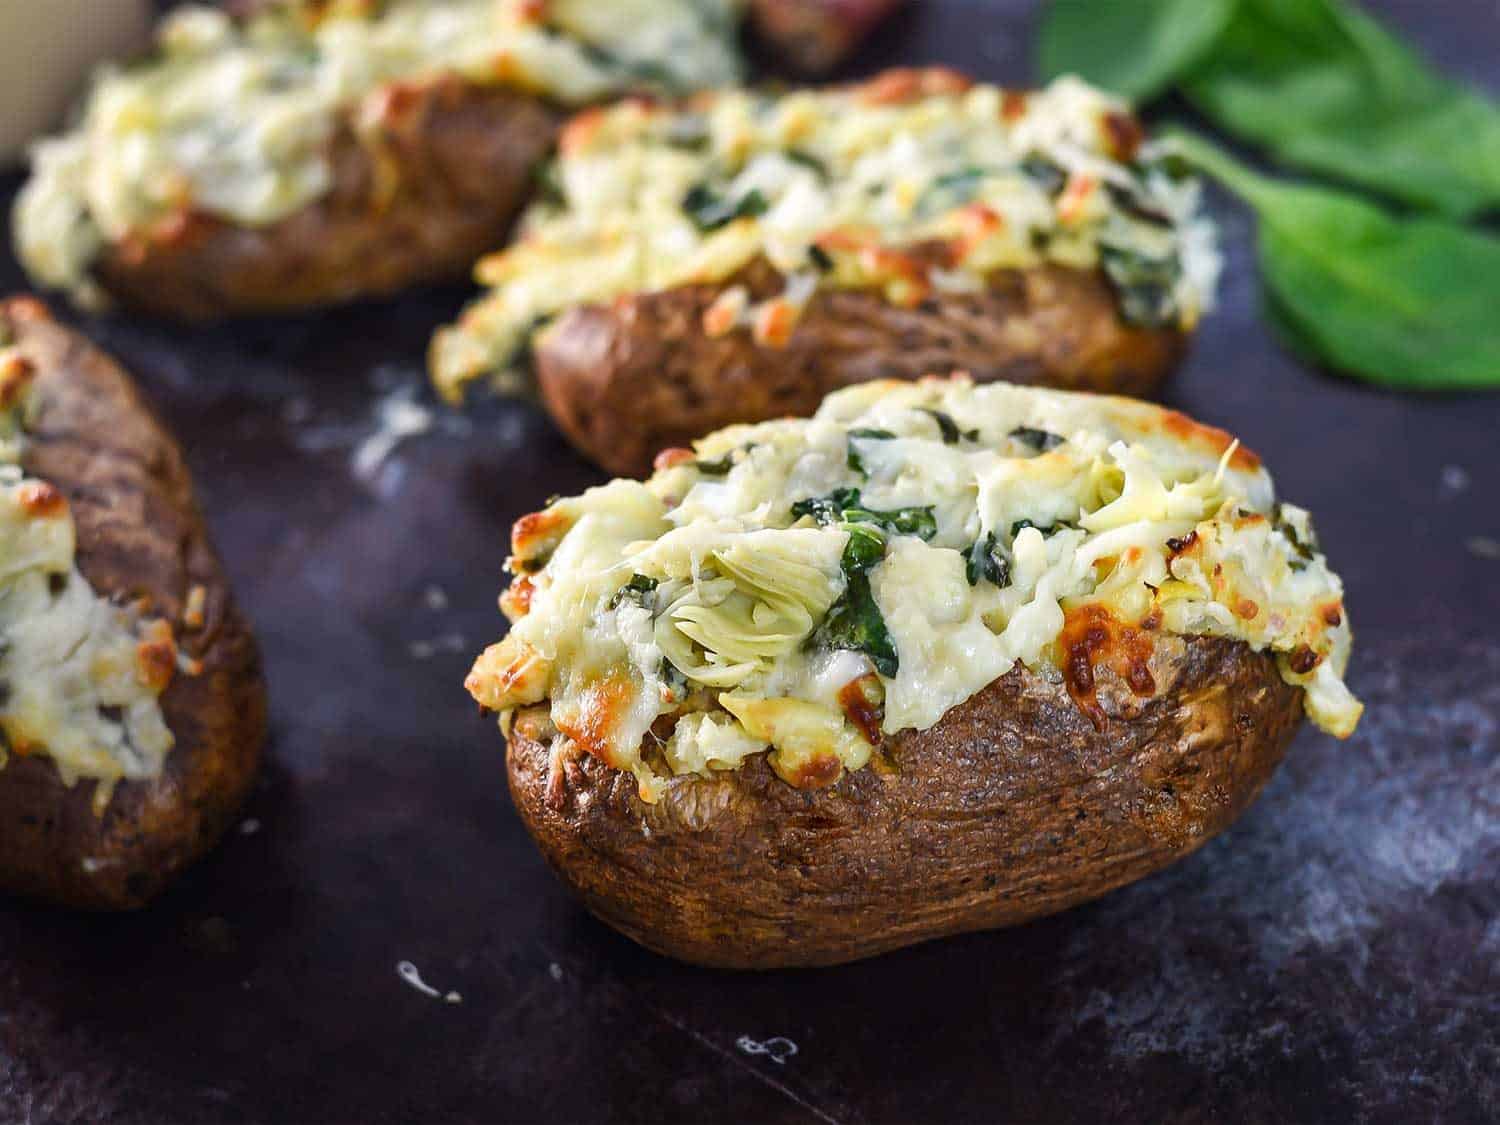 Spinach and artichoke baked potato